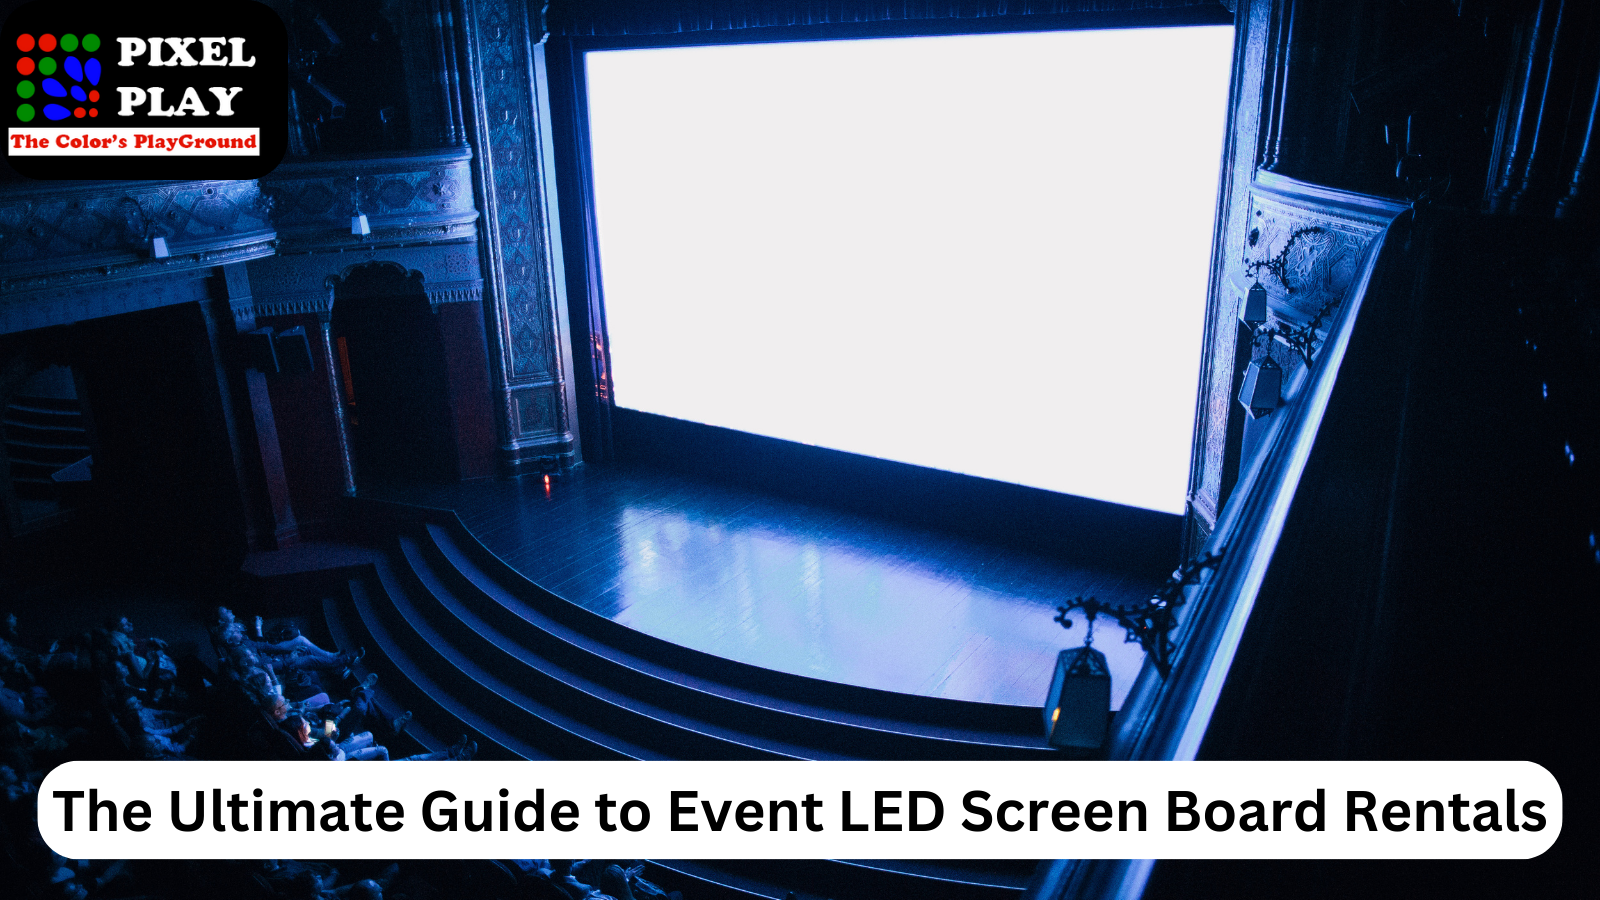 The Ultimate Guide to Event LED Screen Board Rentals